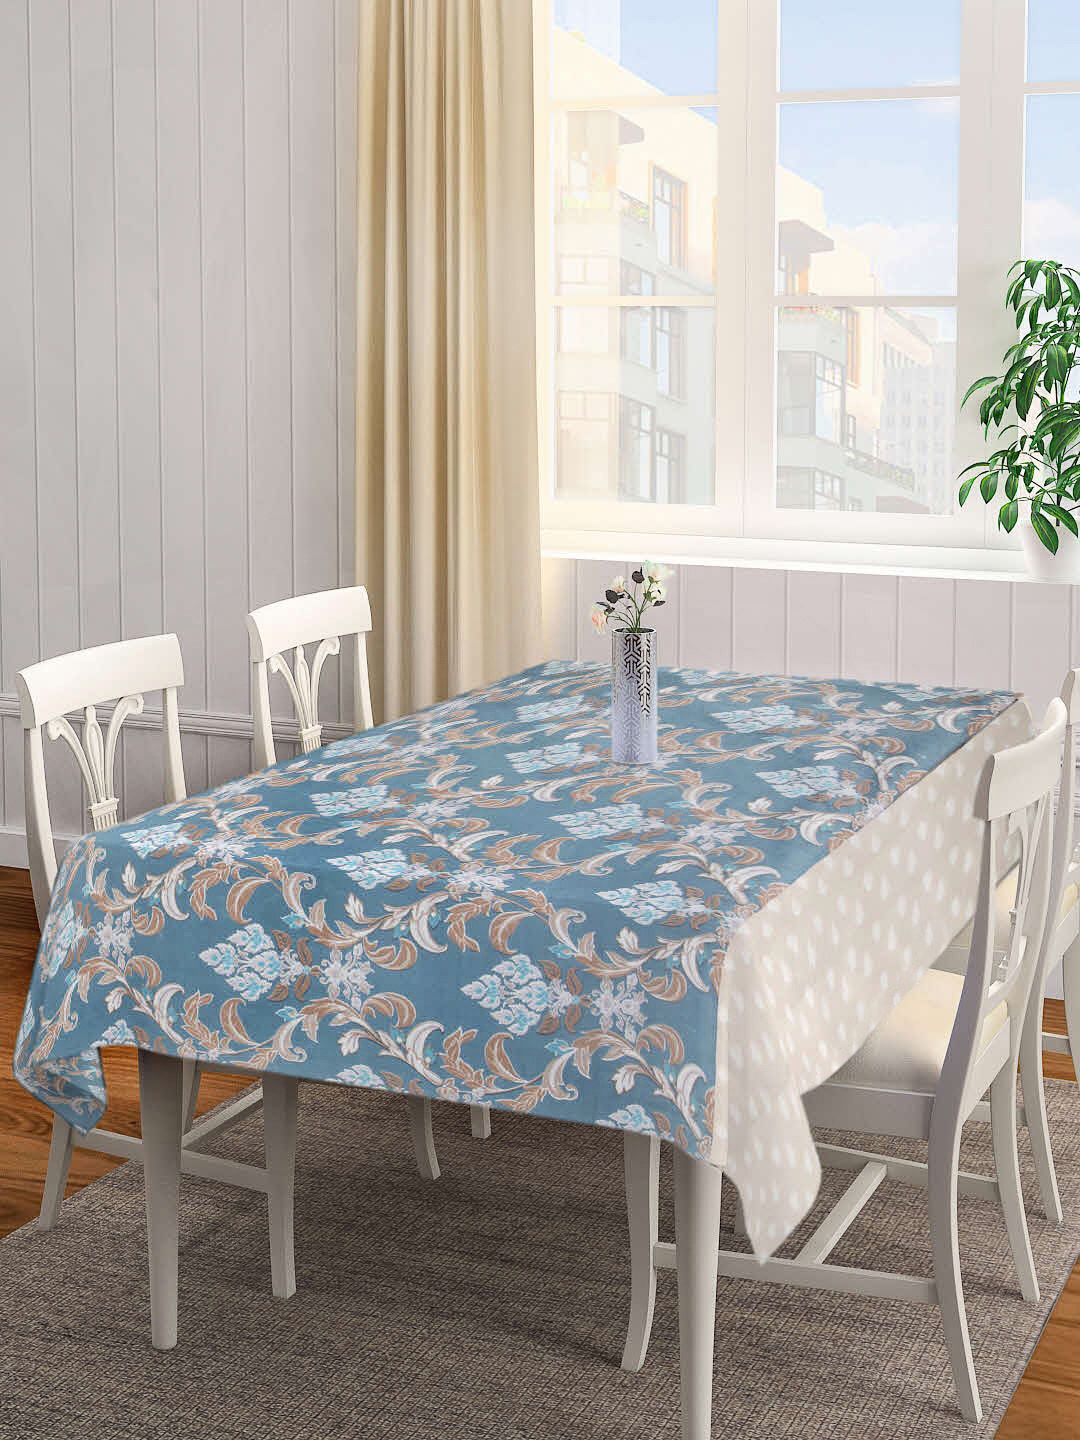 Arrabi Blue & Beige Ethnic Motif Printed 6-Seater Table Cover Price in India